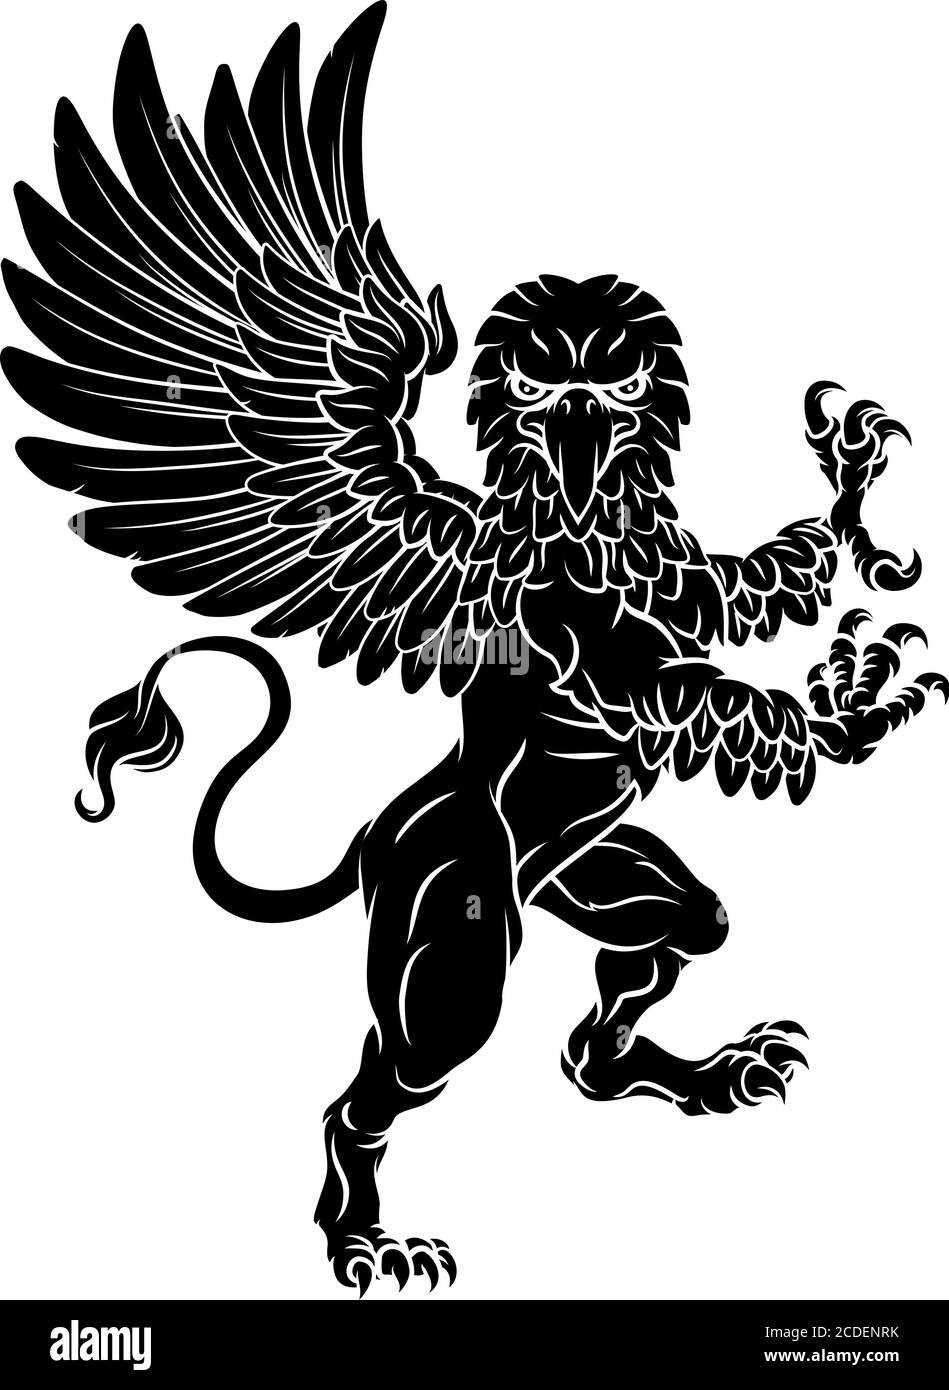 Gryphon Rampant Griffin Coat Of Arms Crest Mascot Stock Vector